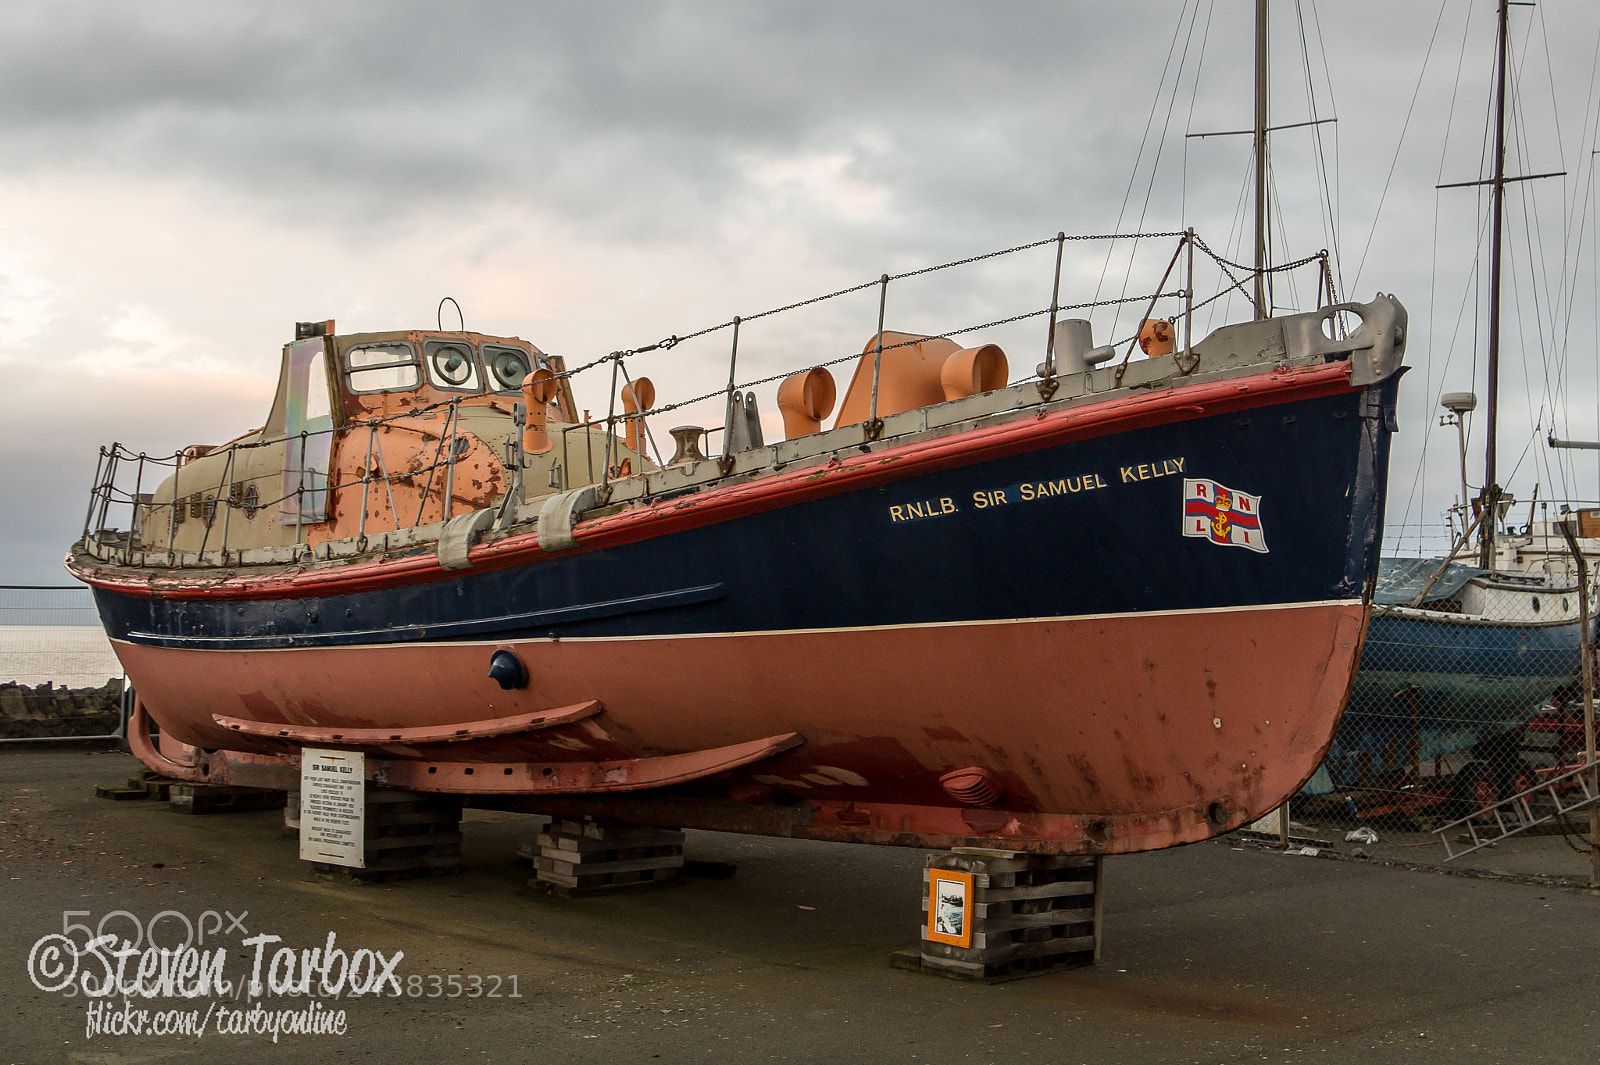 Sony SLT-A58 sample photo. The former donaghadee lifeboat photography